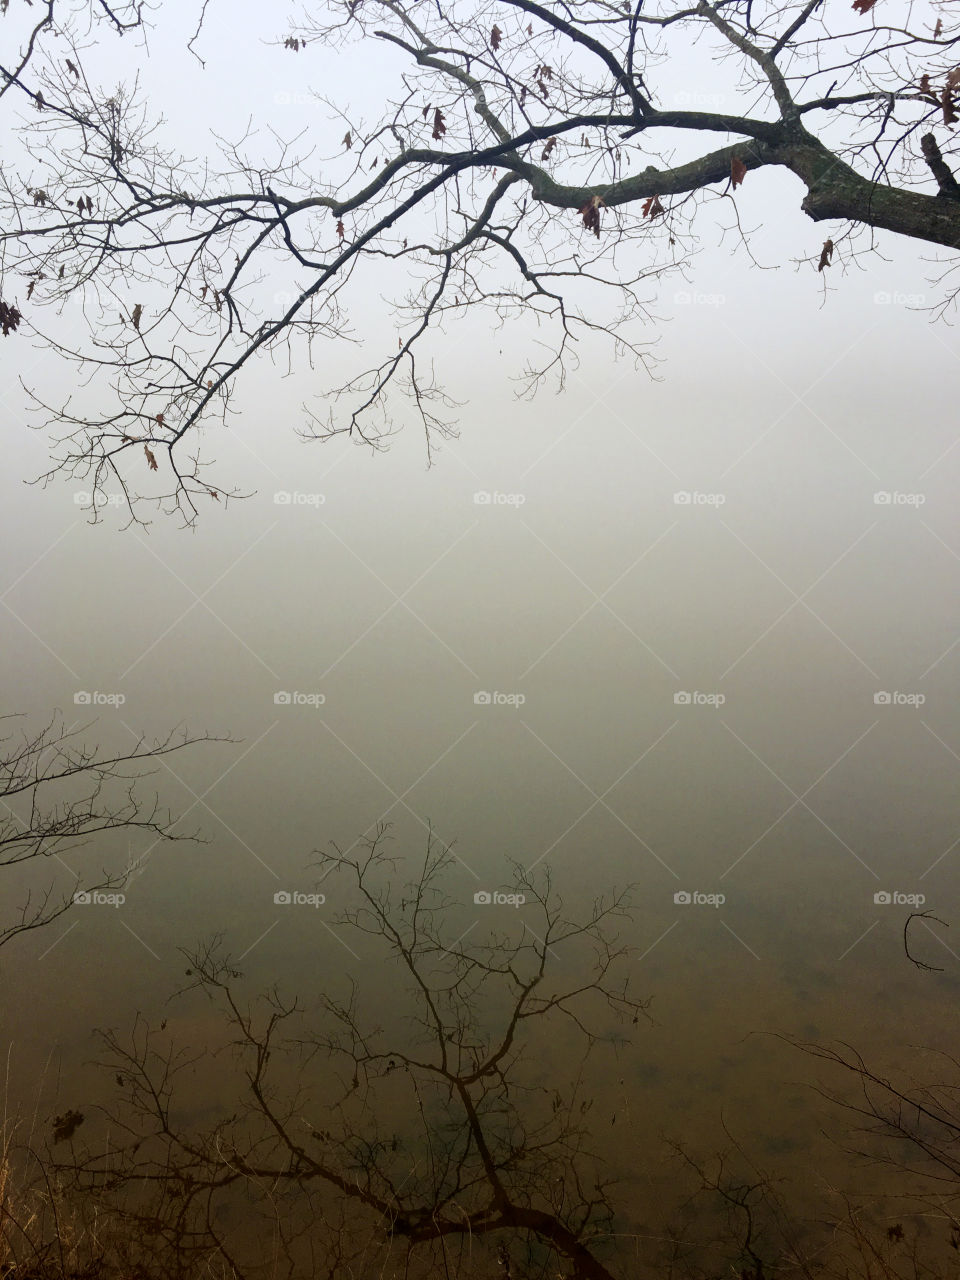 Mirror reflection of a barren tree branch on the placid surface of the water at a lake in North Carolina on a foggy morning 